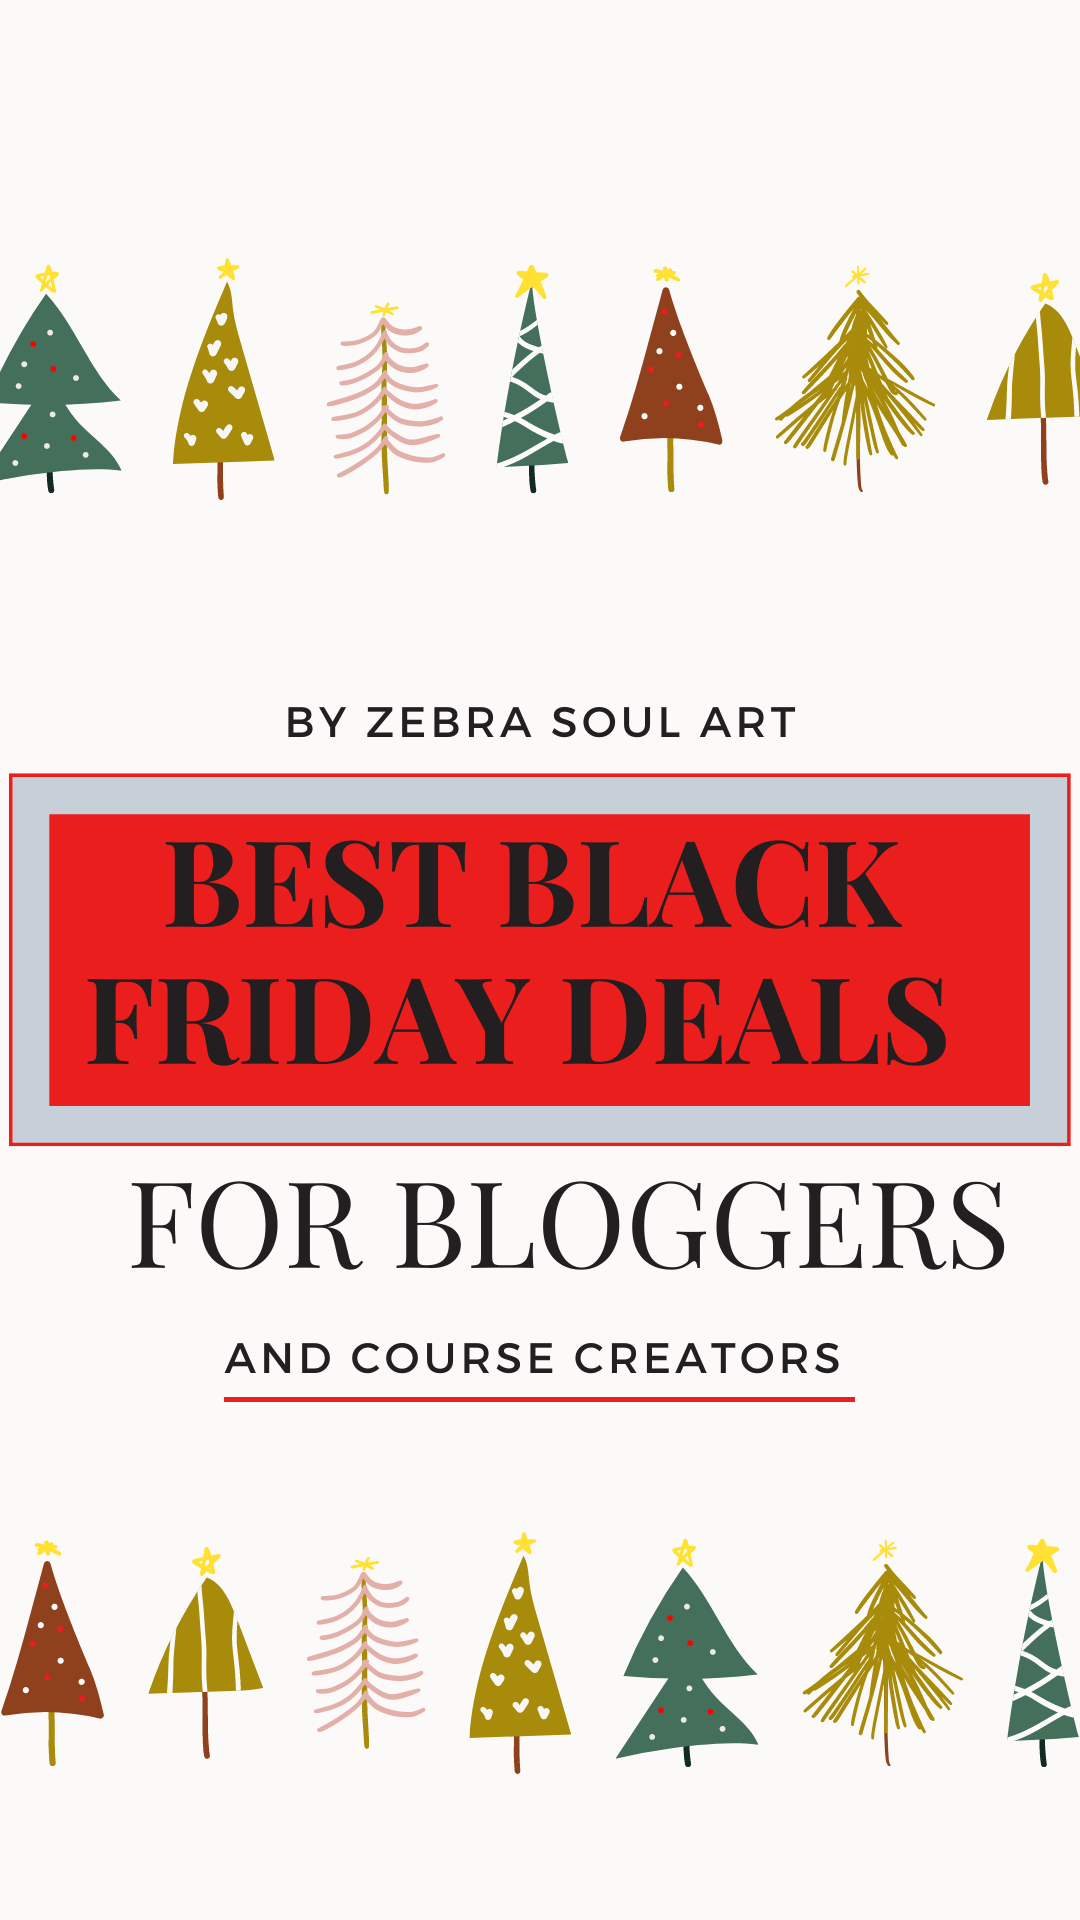 image with christmas treas, BLACK friday deals bloggers course creators